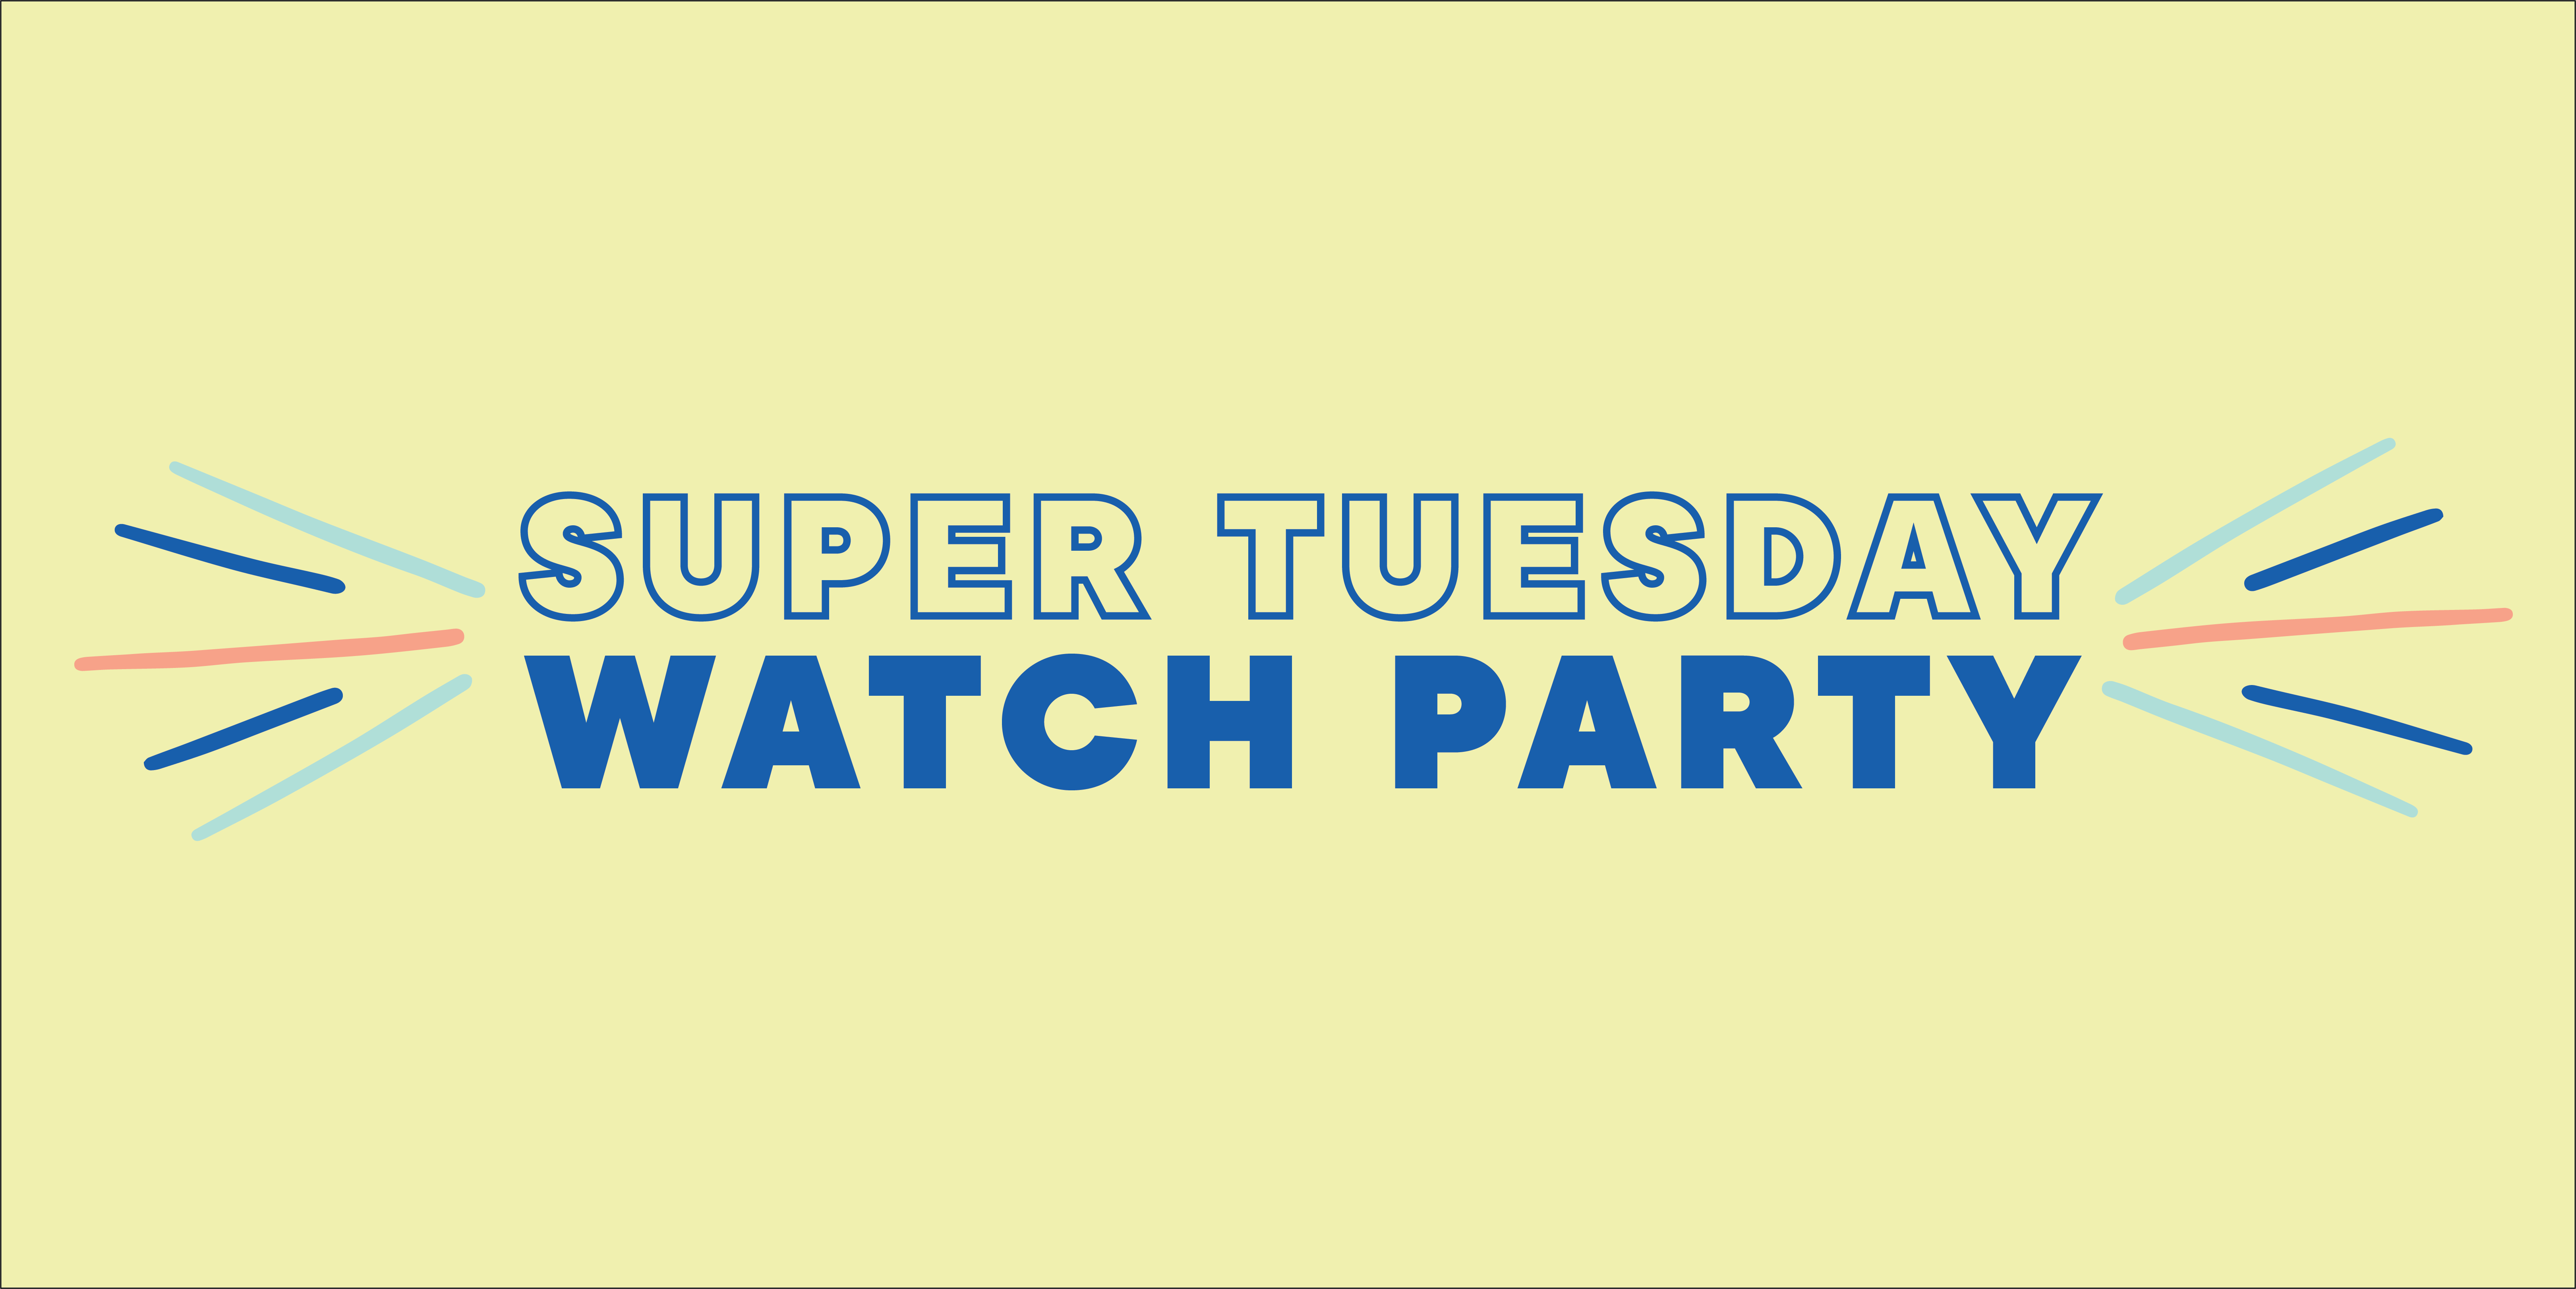 Super Tuesday Watch Party with The Outrage and A Tour of Her Own